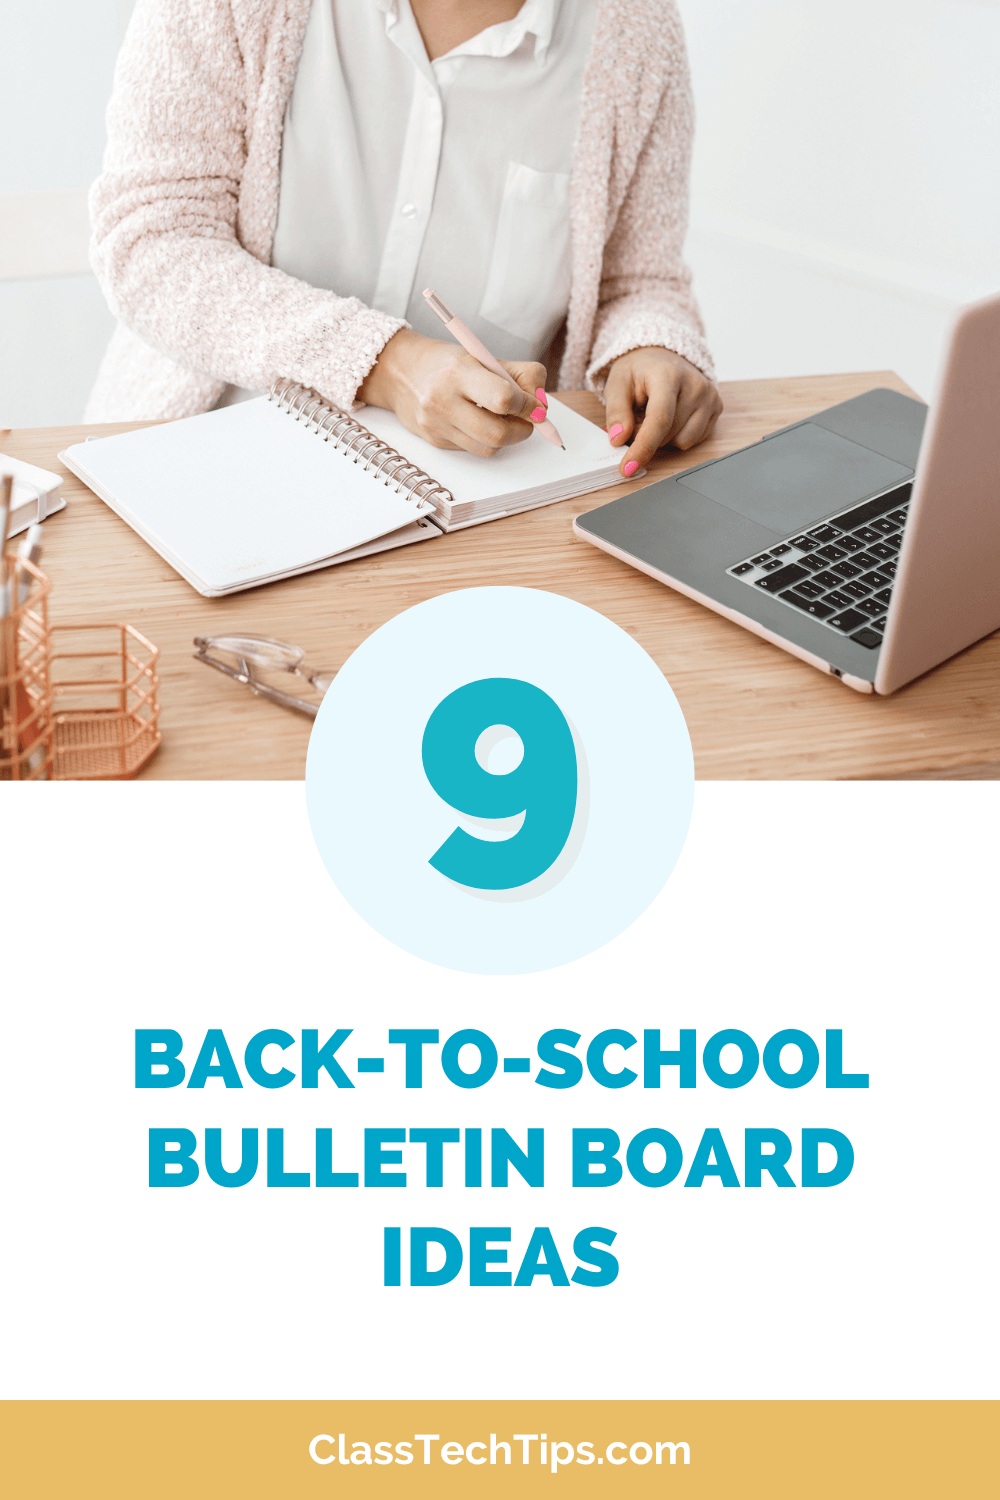 Back-to-School bulletin board ideas: A teacher writing in a notebook with a laptop on the desk, highlighting 9 creative ways to welcome students.